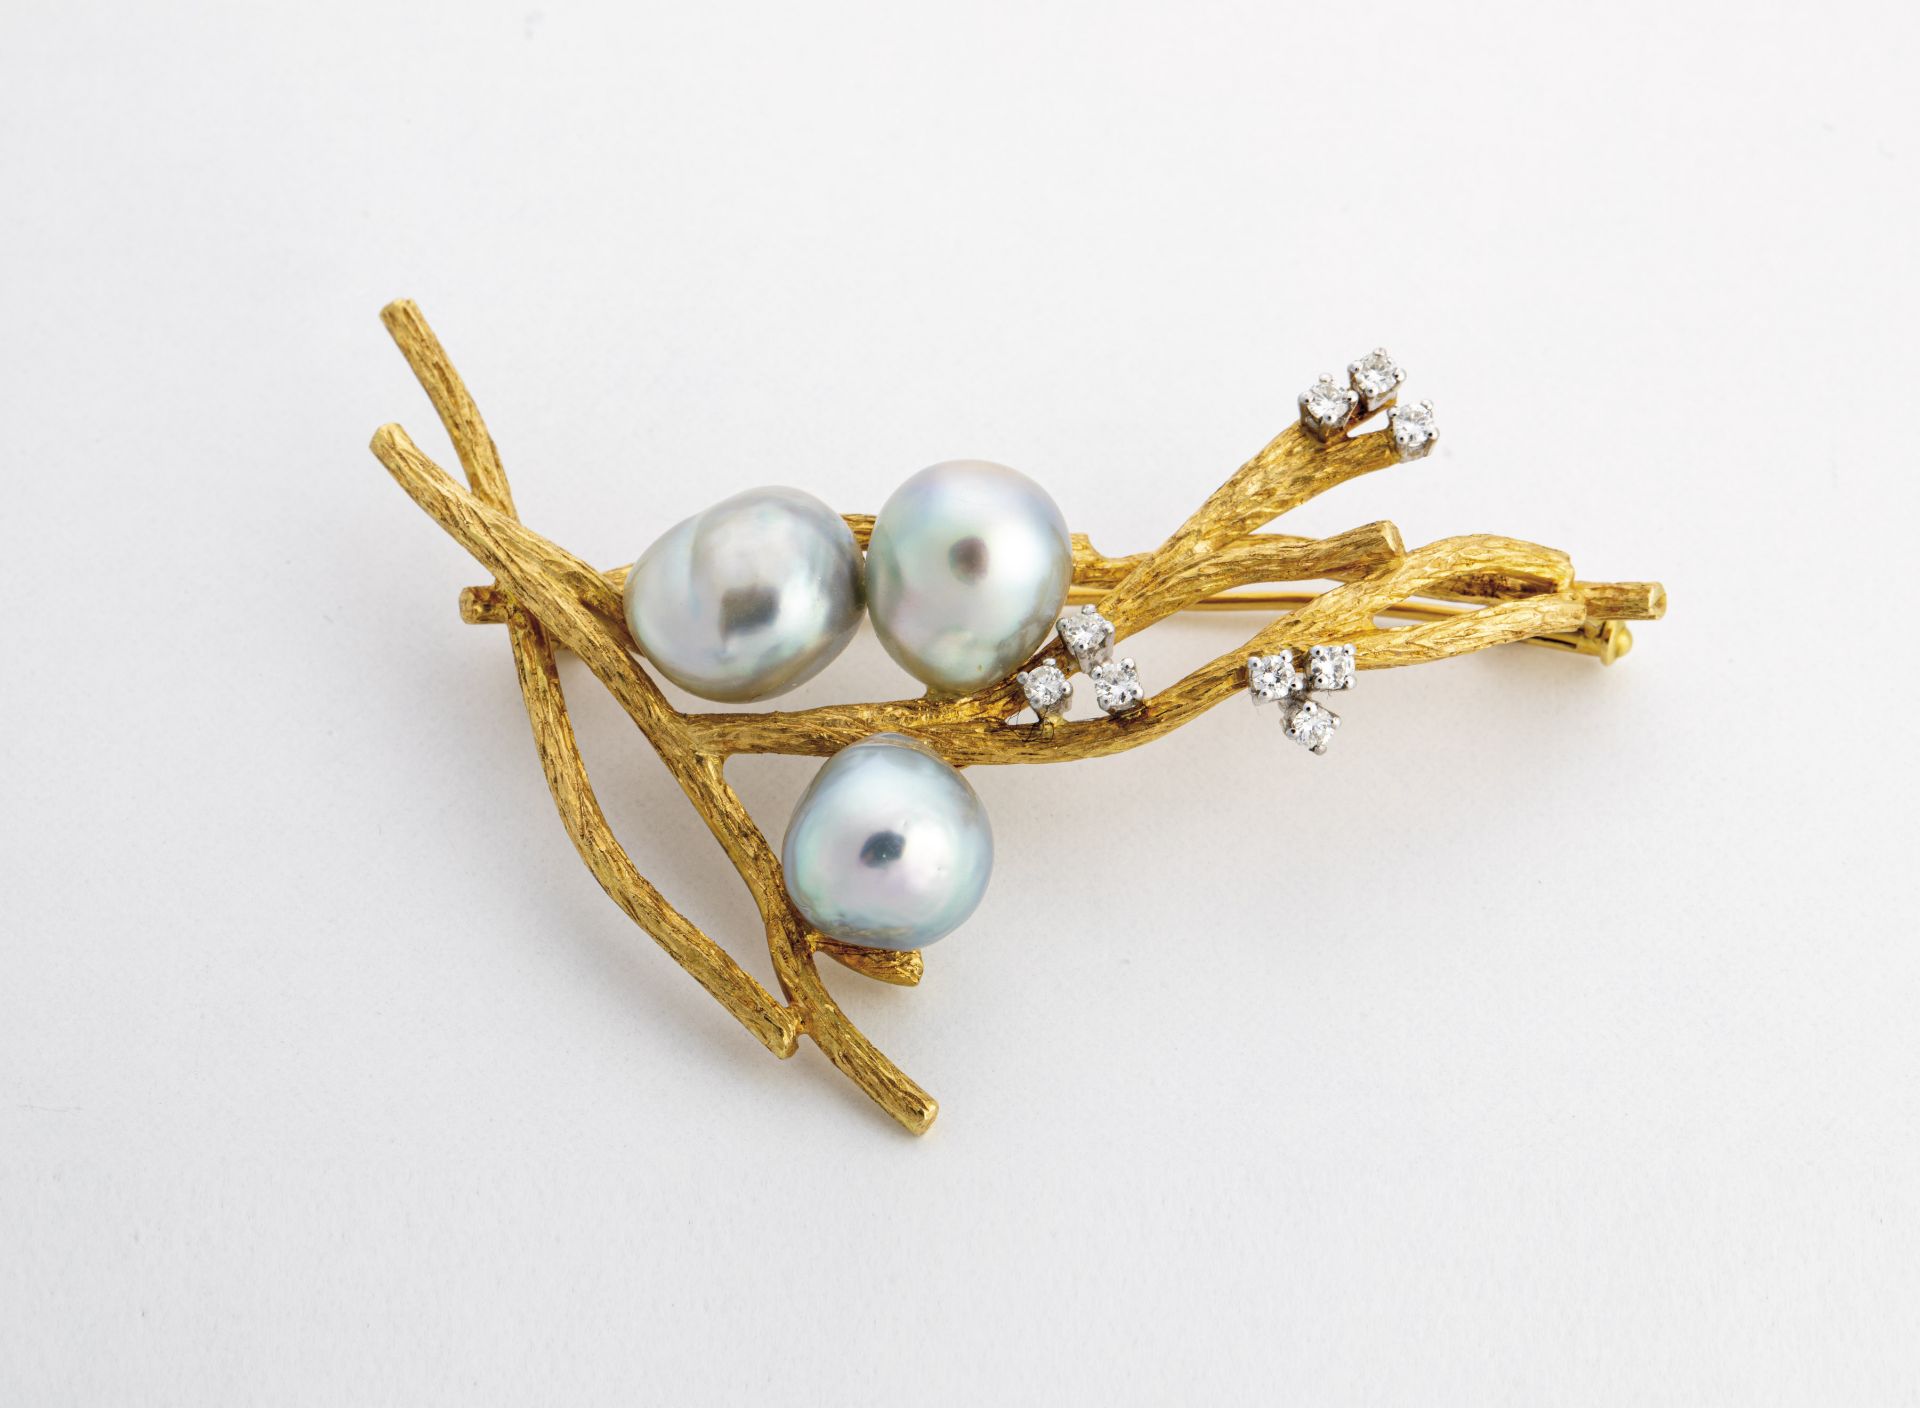 Flower branch brooch with tahiti pearls and diamonds